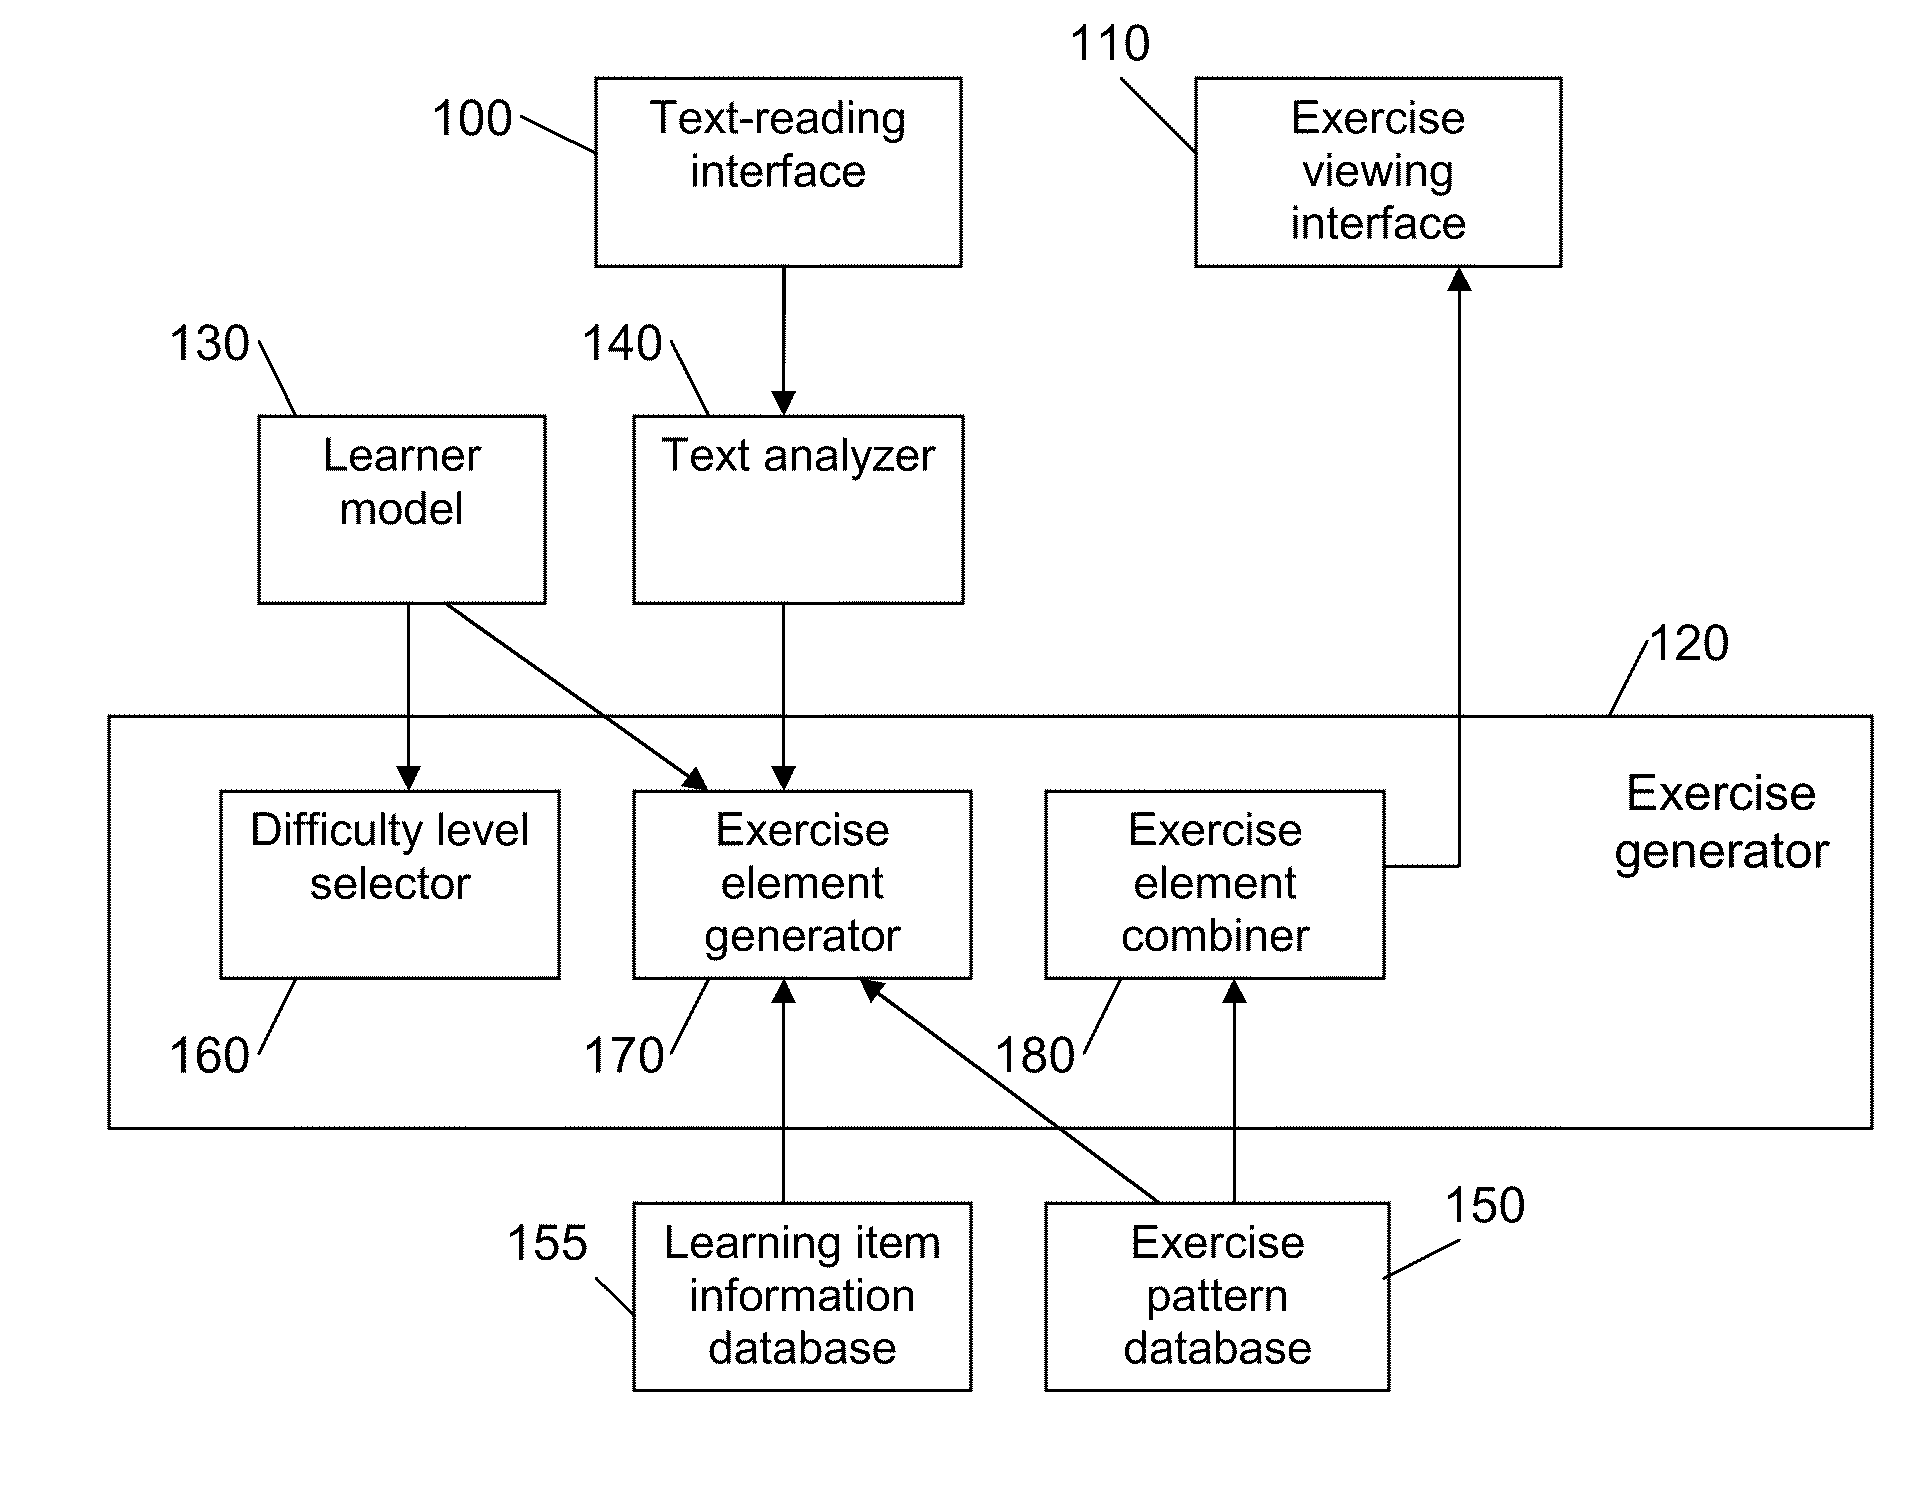 Apparatus and method for automatic generation of personalized learning and diagnostic exercises